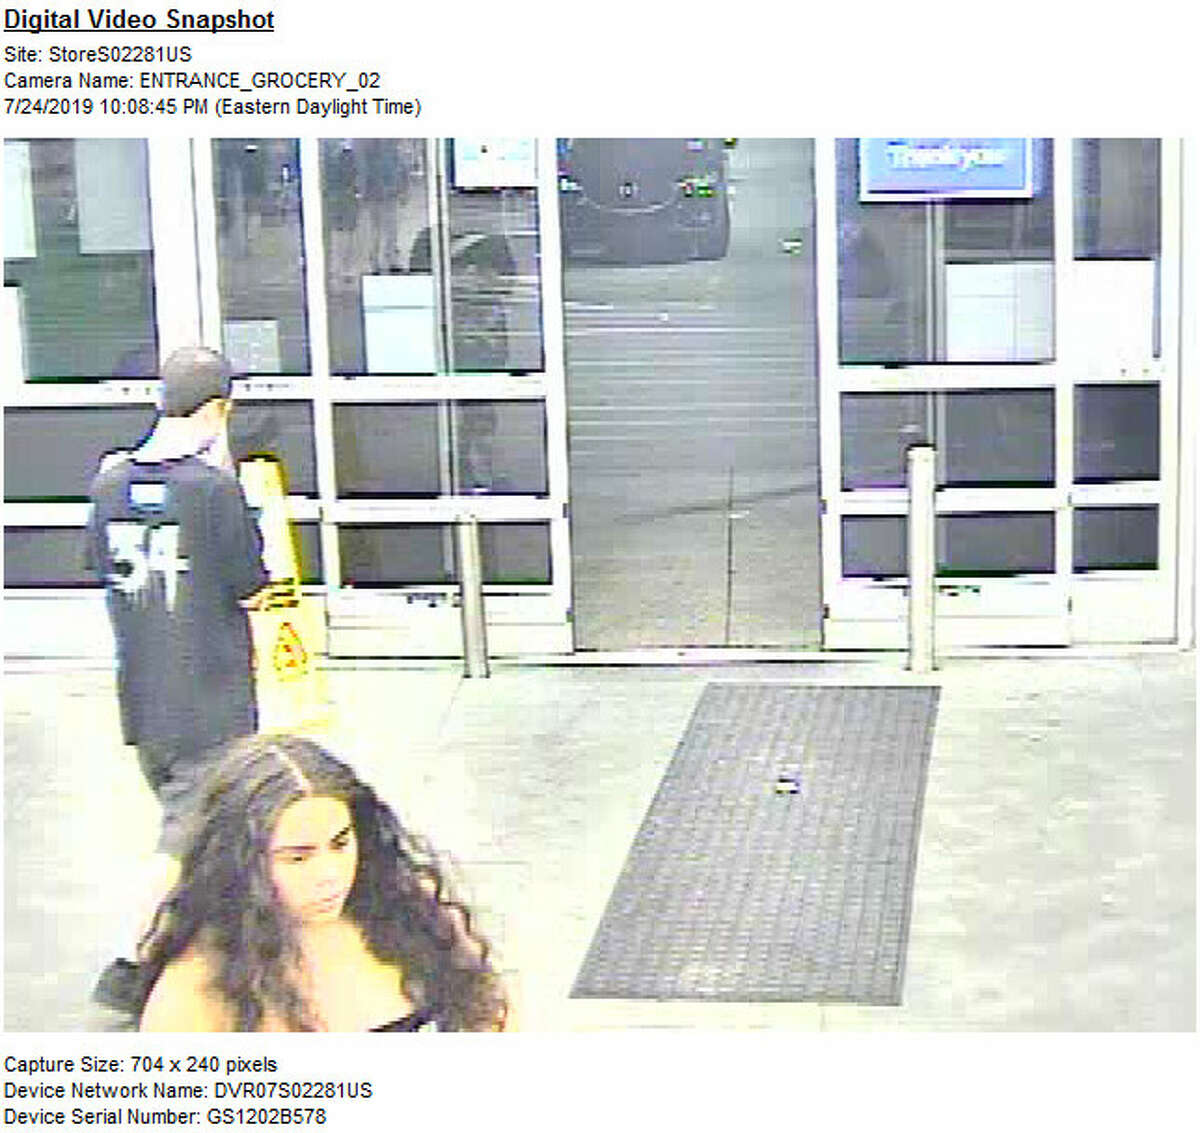 Pennsylvania police are looking for a woman seen in at a West Mifflin Borough Walmart on July 24, 2019 in connection to an incident involving potatoes and urine.